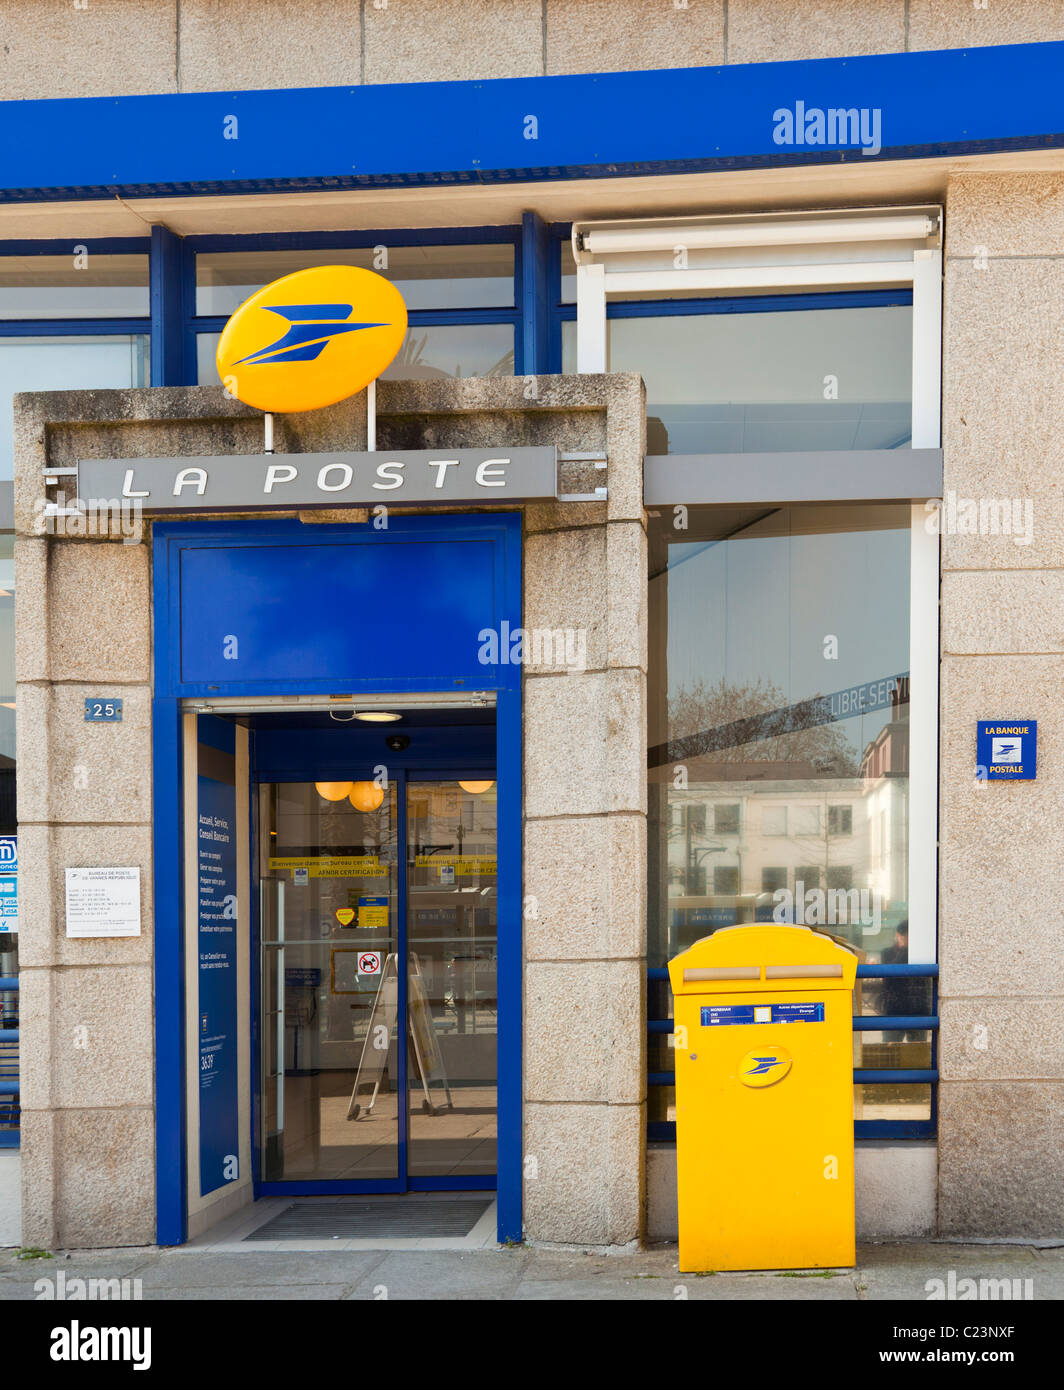 La Poste, French Post Office Building, France, Europe Stock Photo